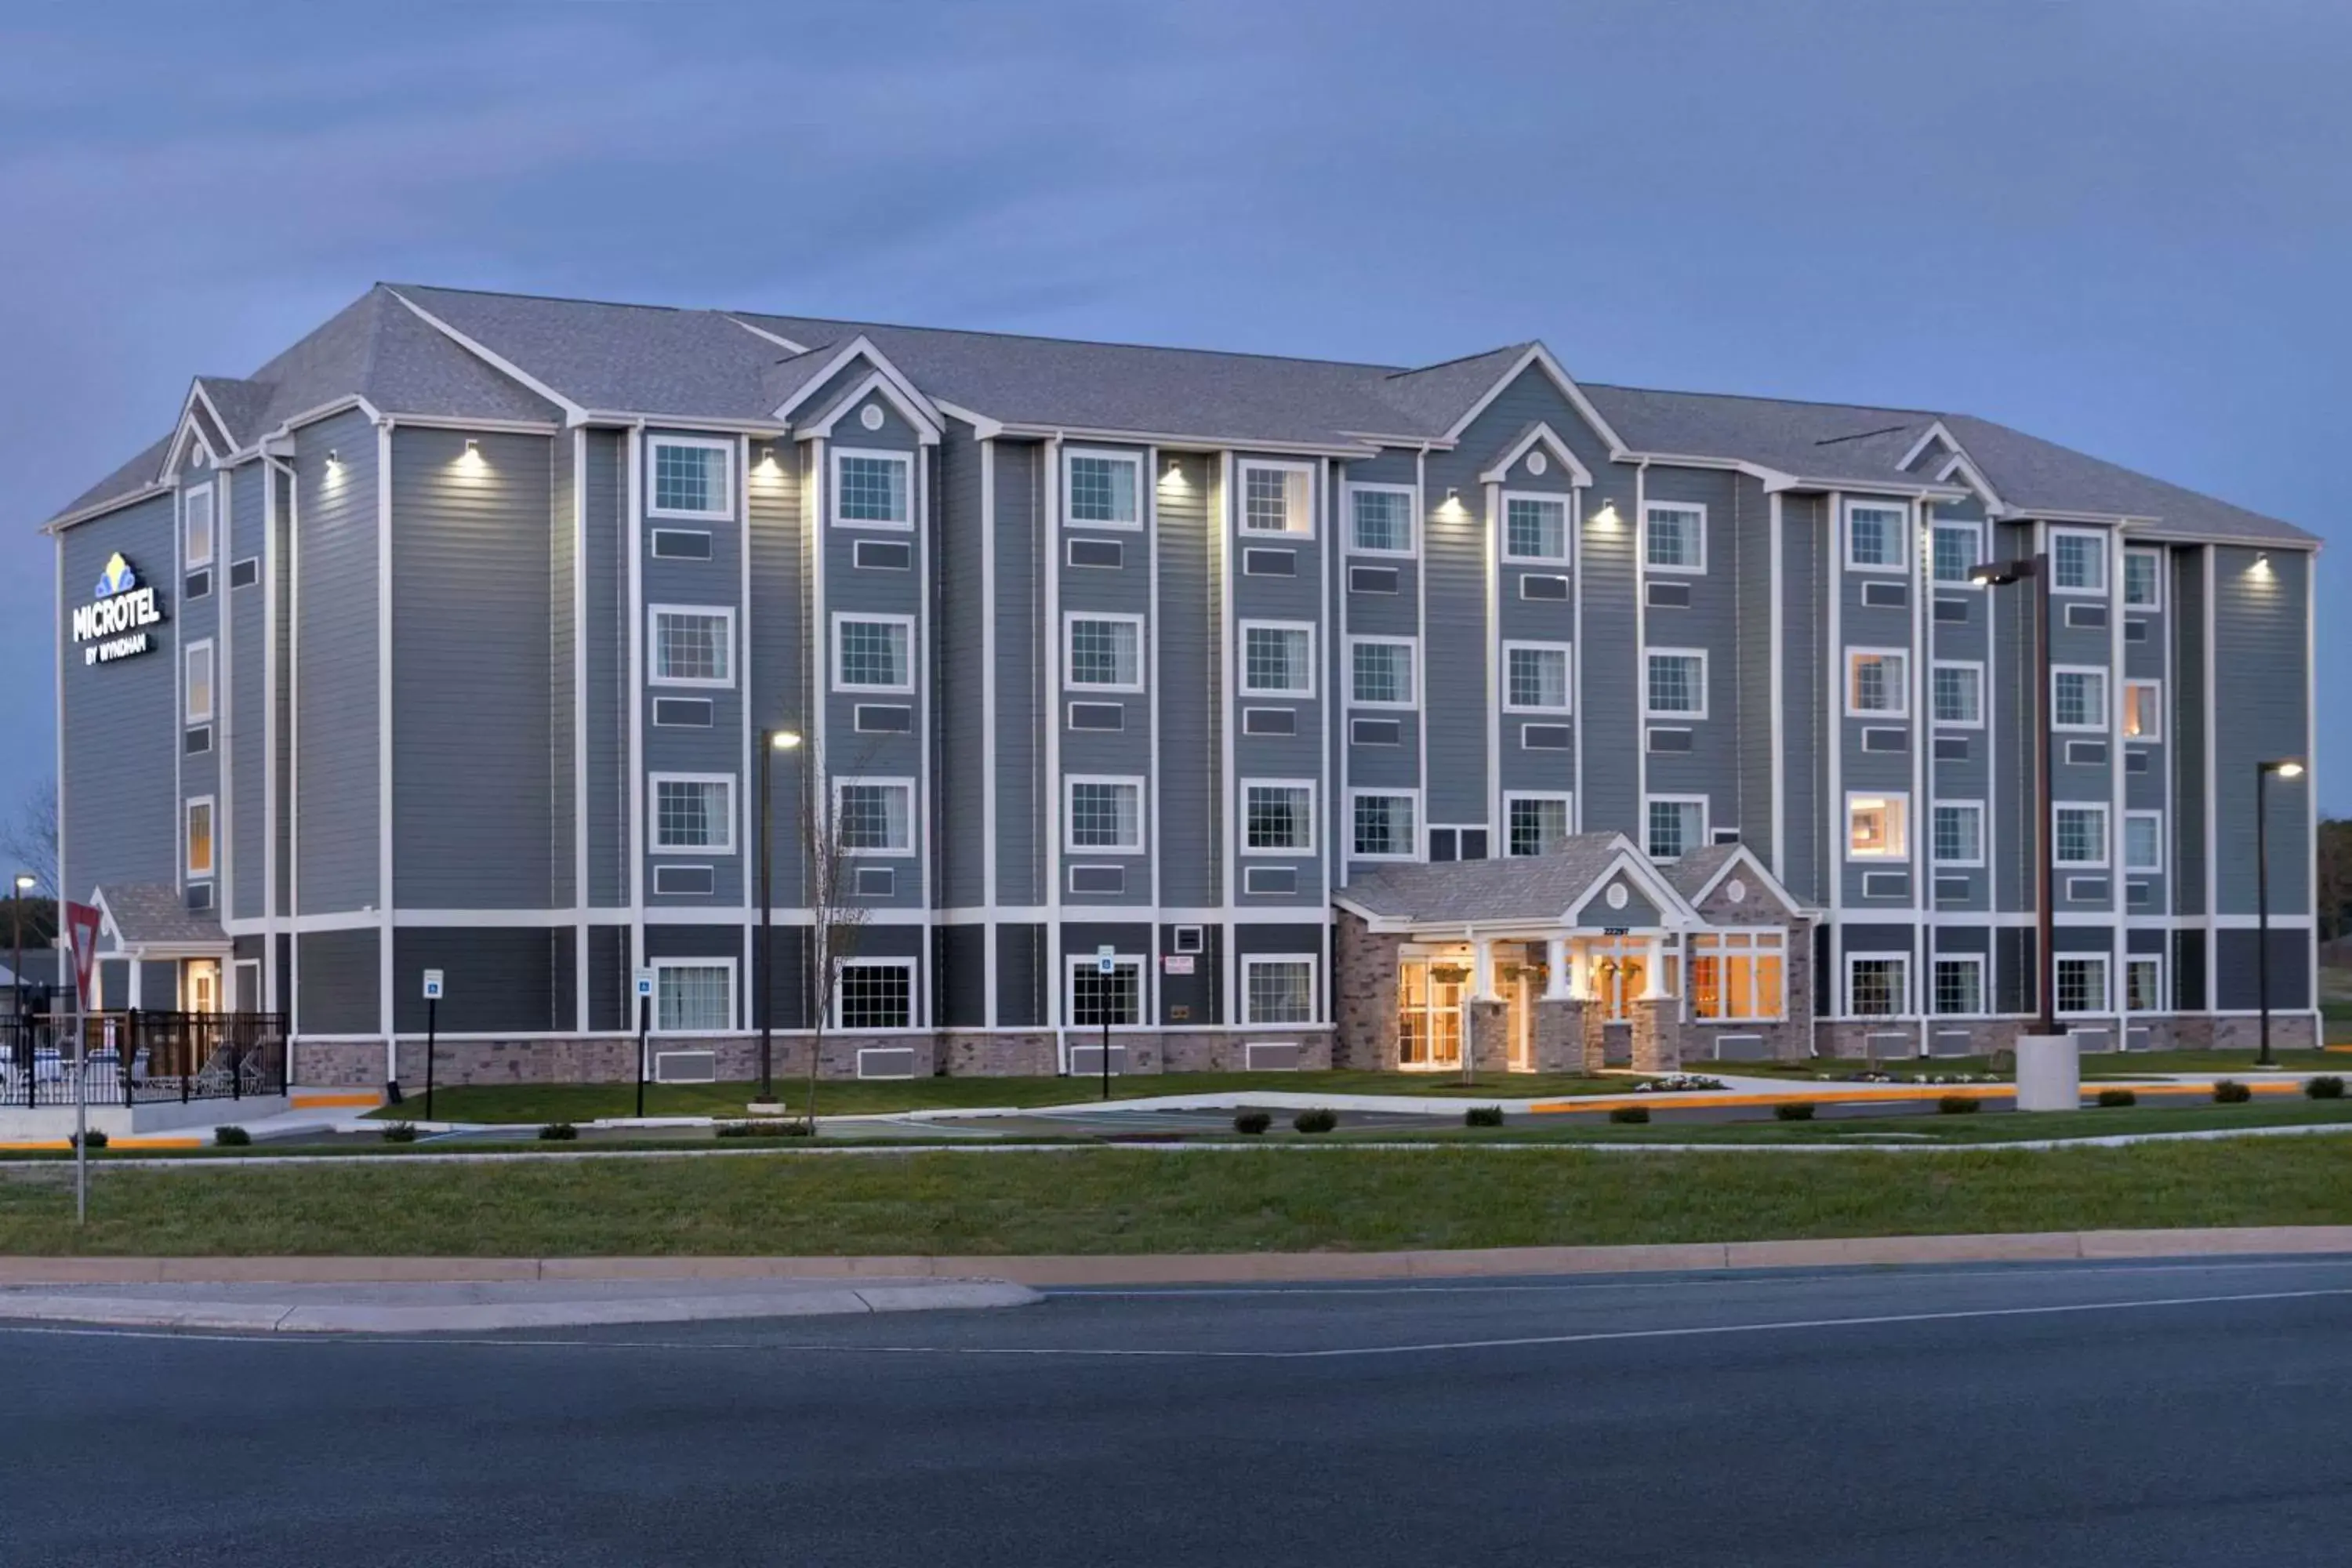 Property Building in Microtel Inn & Suites by Wyndham Georgetown Delaware Beaches